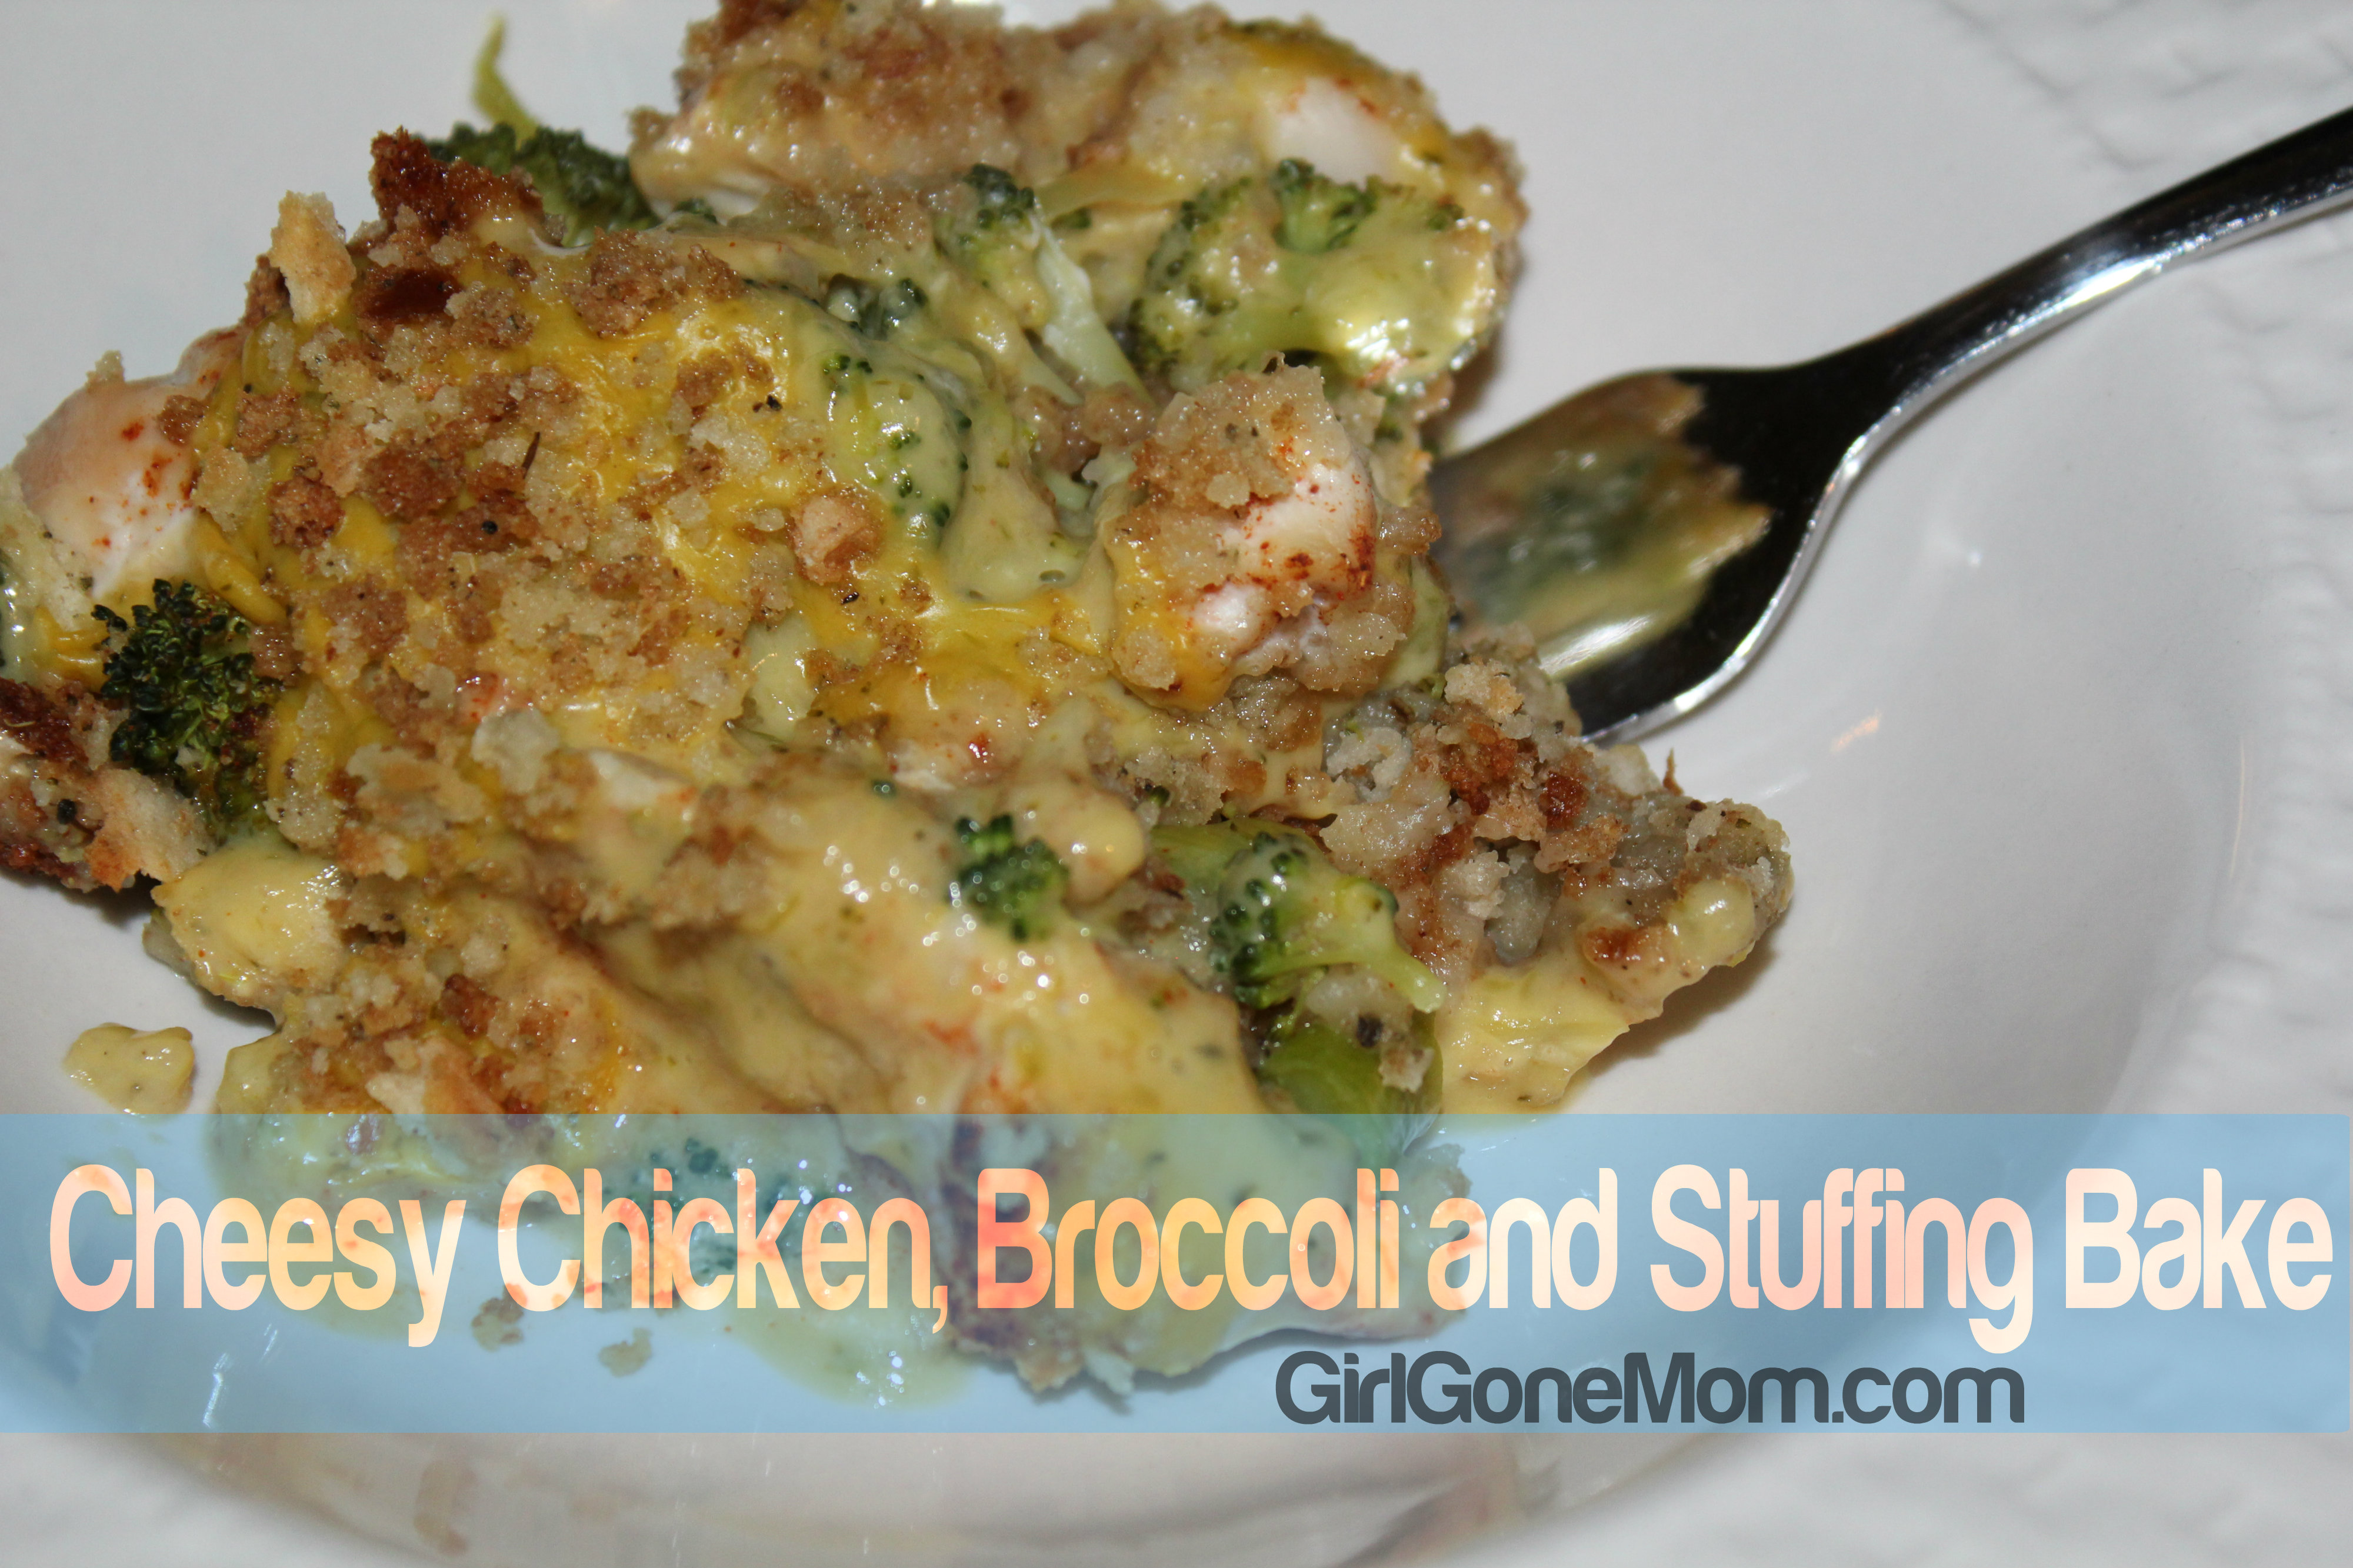 Easy one-dish meal: Cheesy Chicken, Broccoli and Stuffing Bake | GirlGoneMom.com